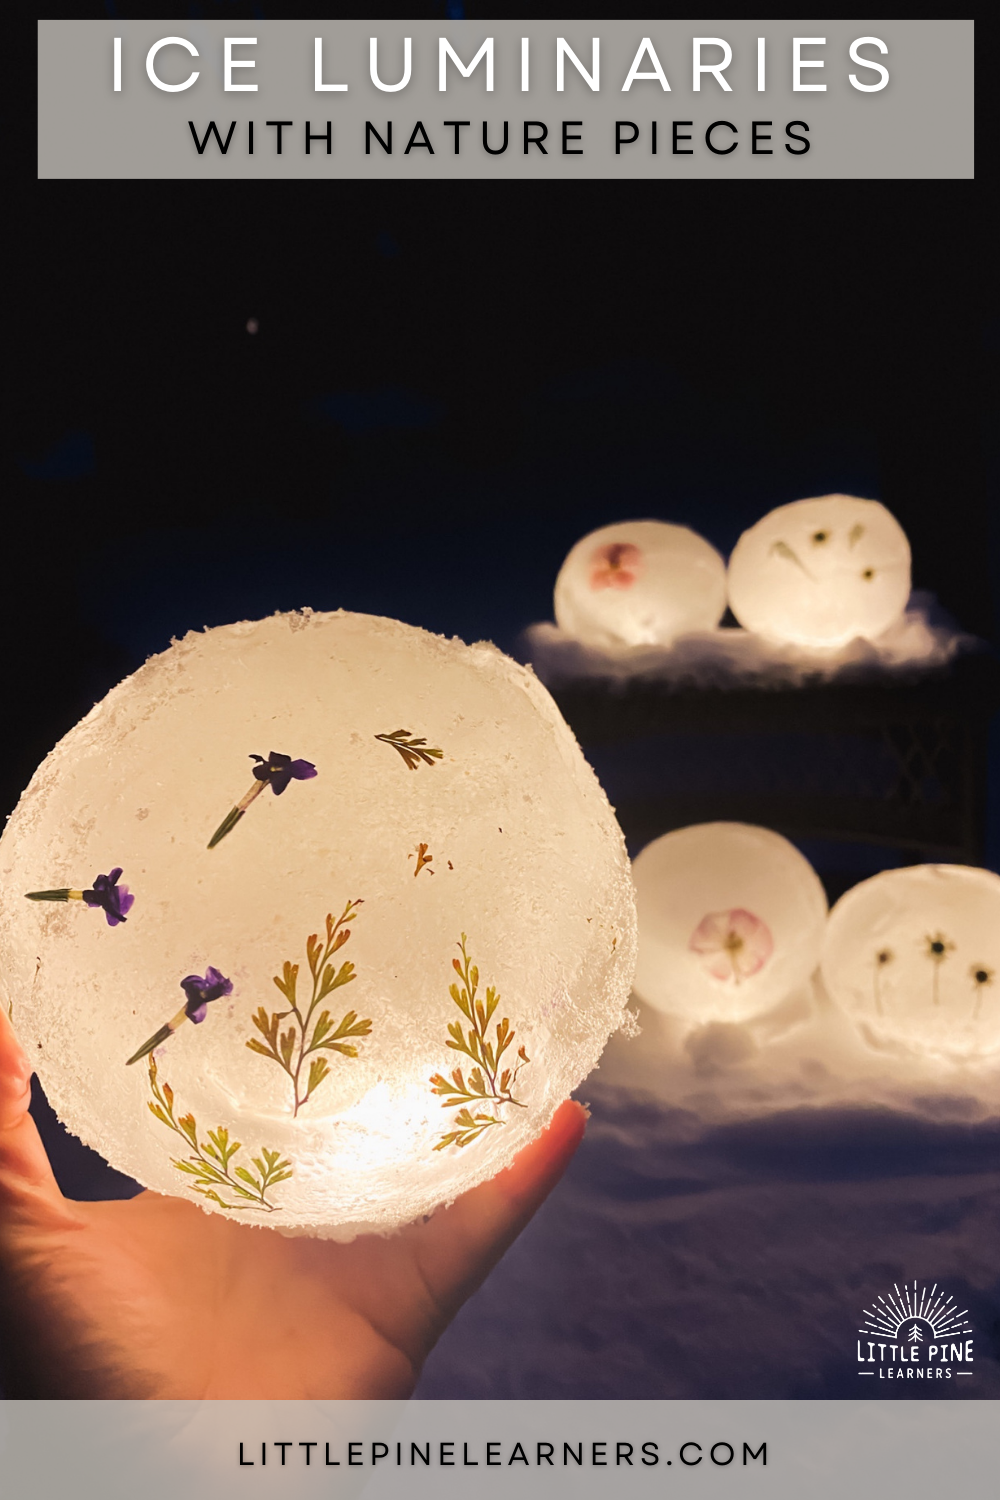 Ice Luminaries with Nature Pieces